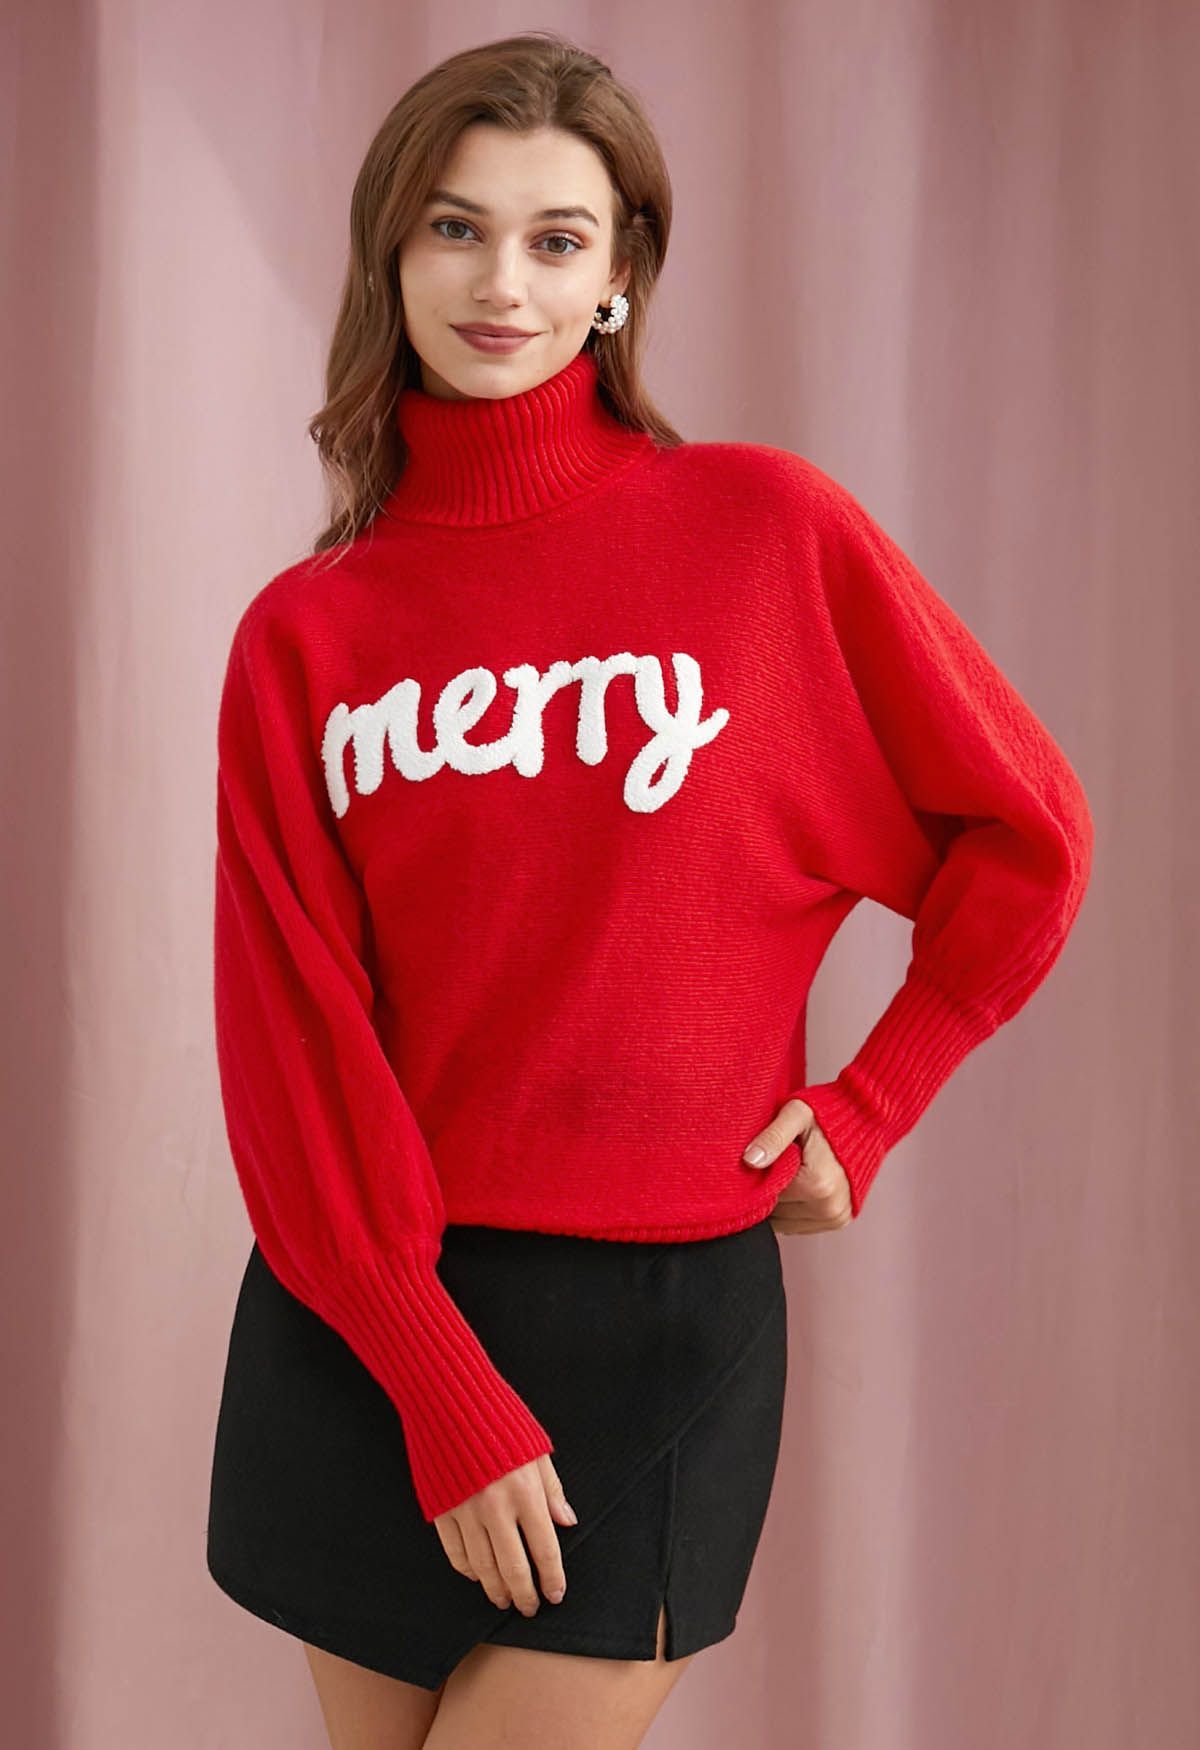 Merry Turtleneck Batwing Sleeve Knit Sweater in Red | Chicwish